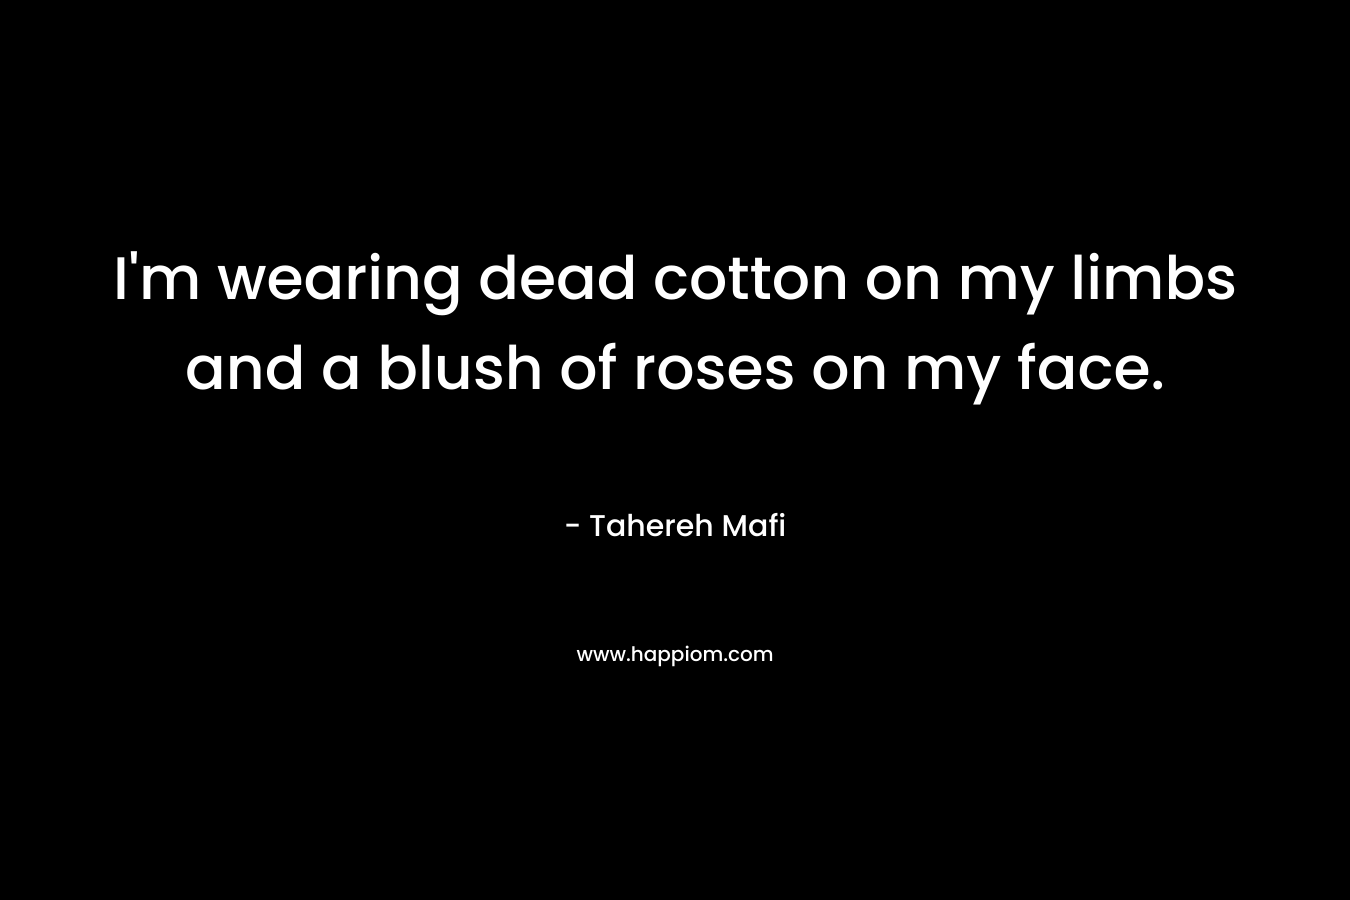 I’m wearing dead cotton on my limbs and a blush of roses on my face. – Tahereh Mafi